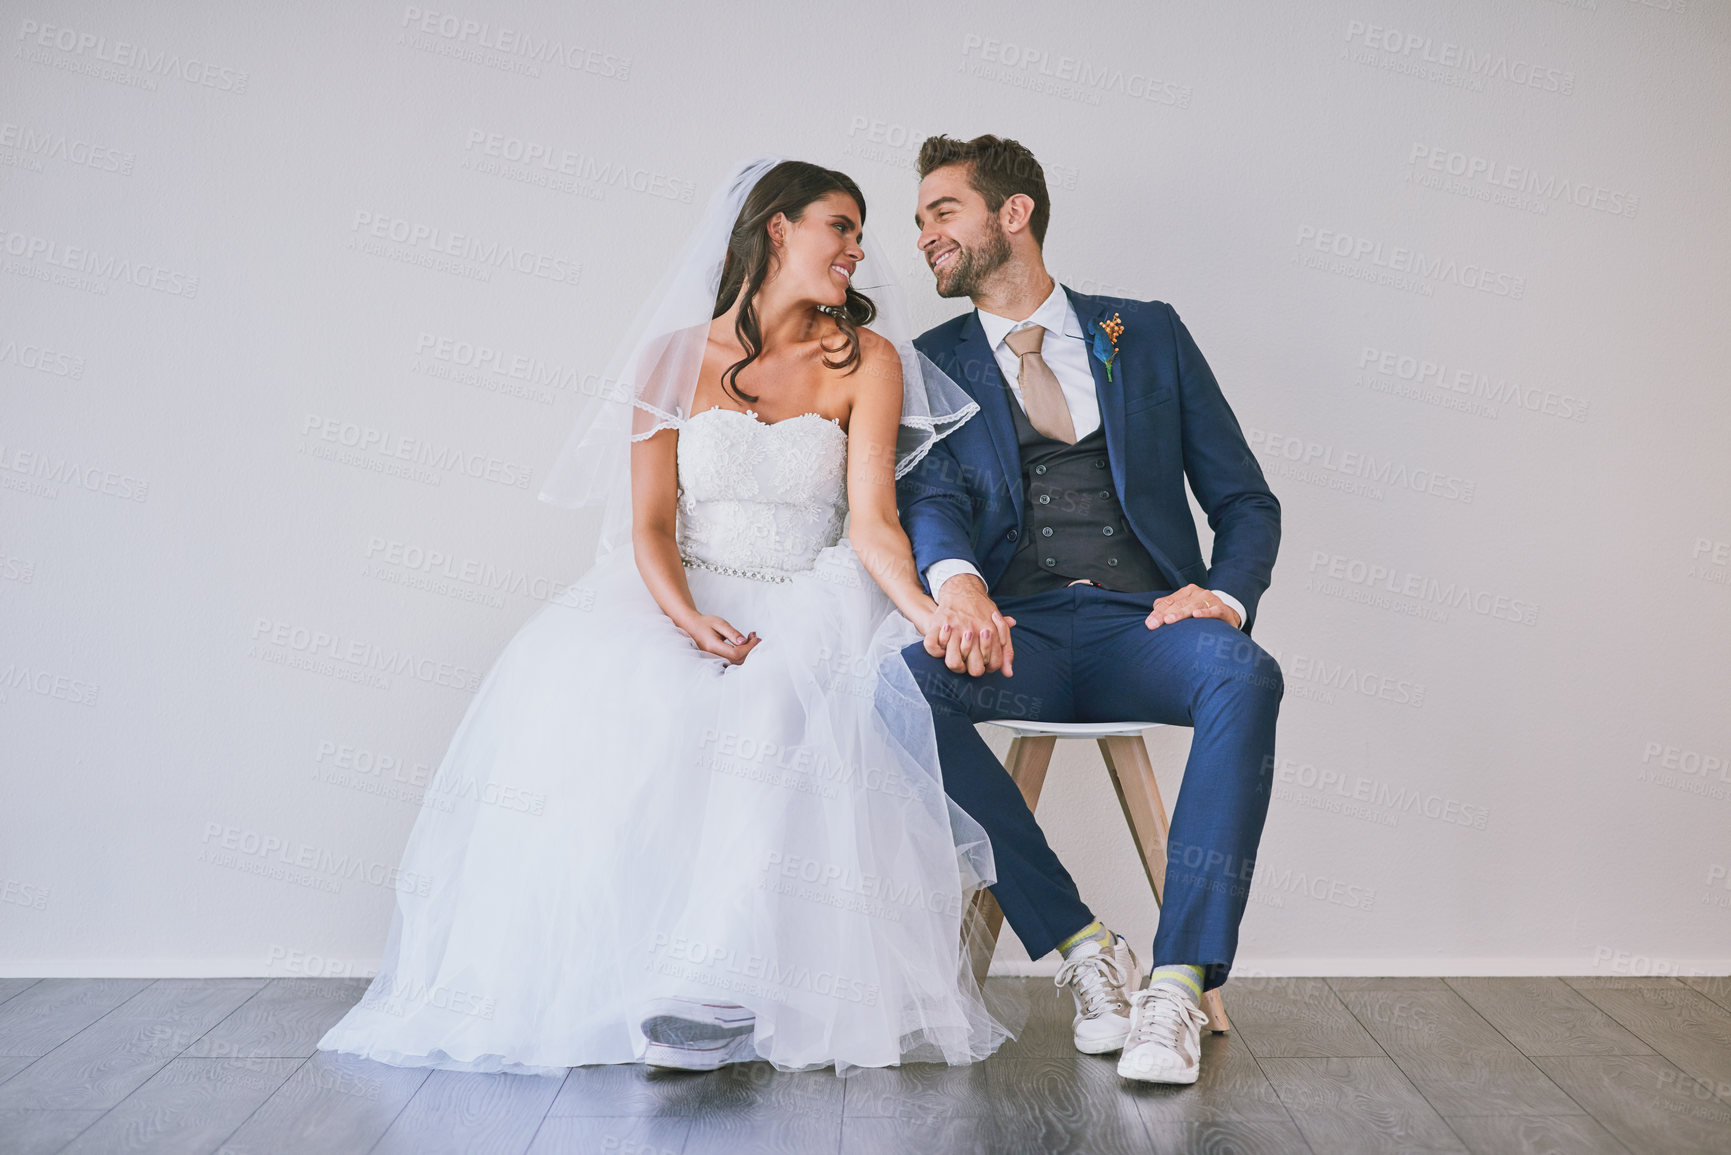 Buy stock photo Studio shot of a newly married young couple sitting together against a gray background